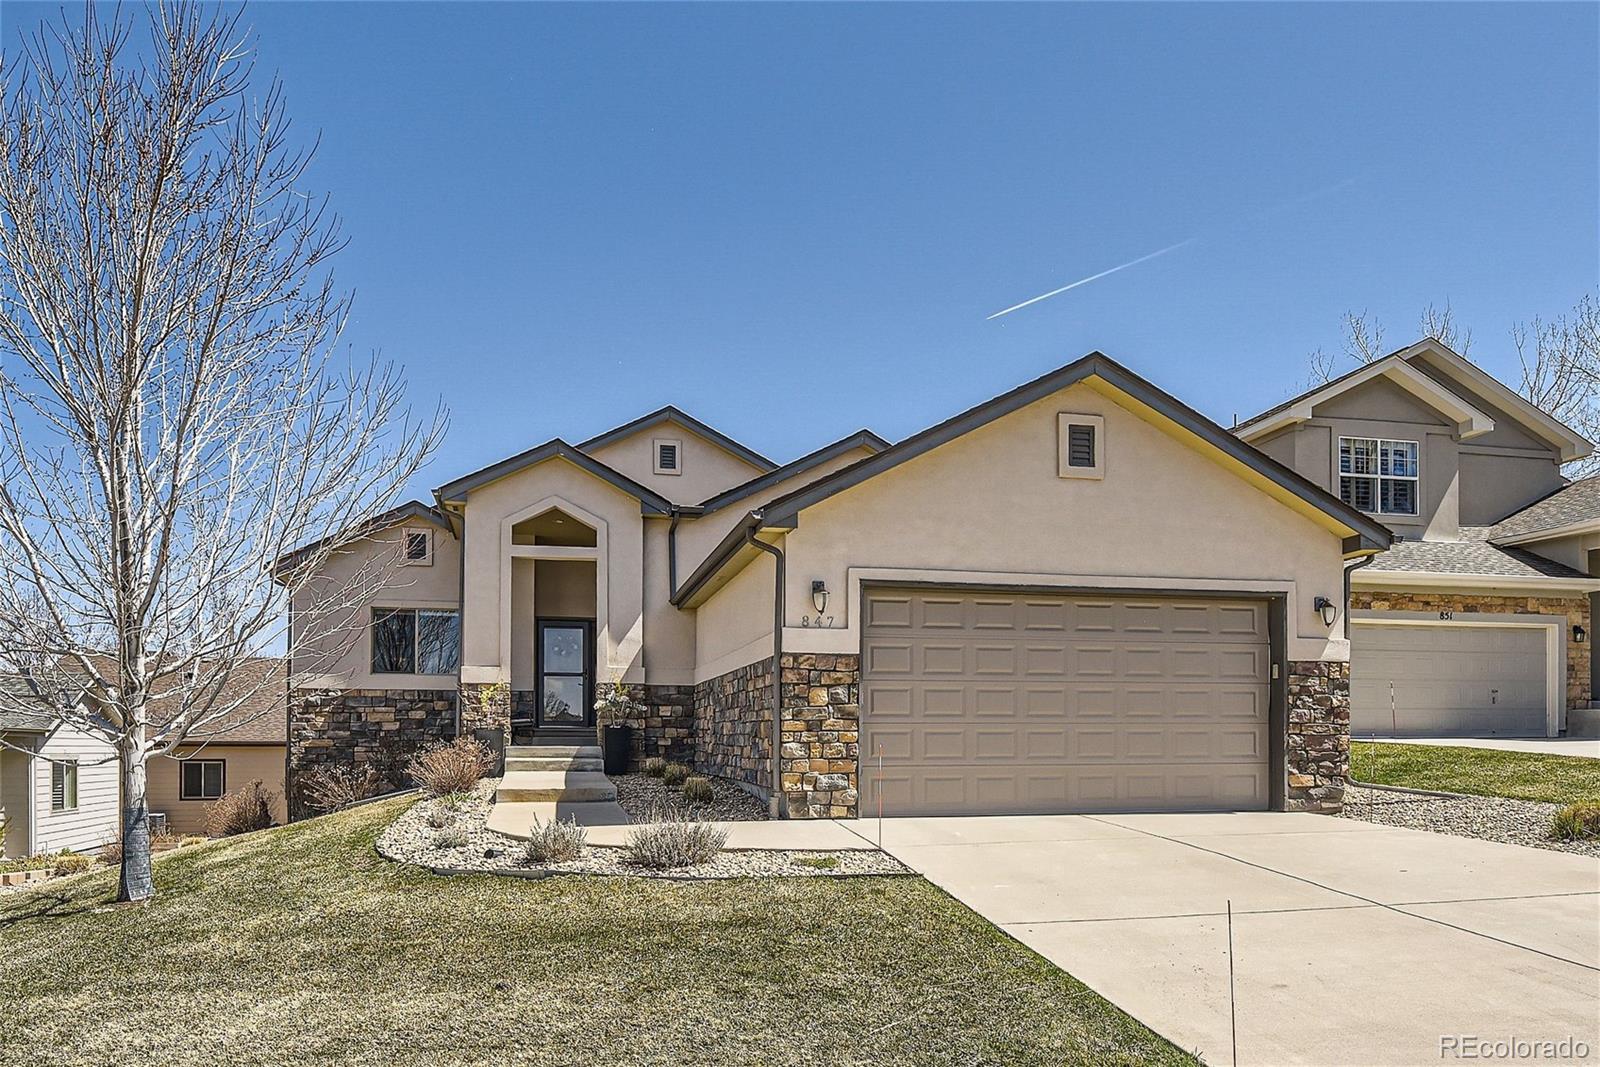 847  Stafford Circle, castle rock MLS: 4088069 Beds: 4 Baths: 3 Price: $695,000